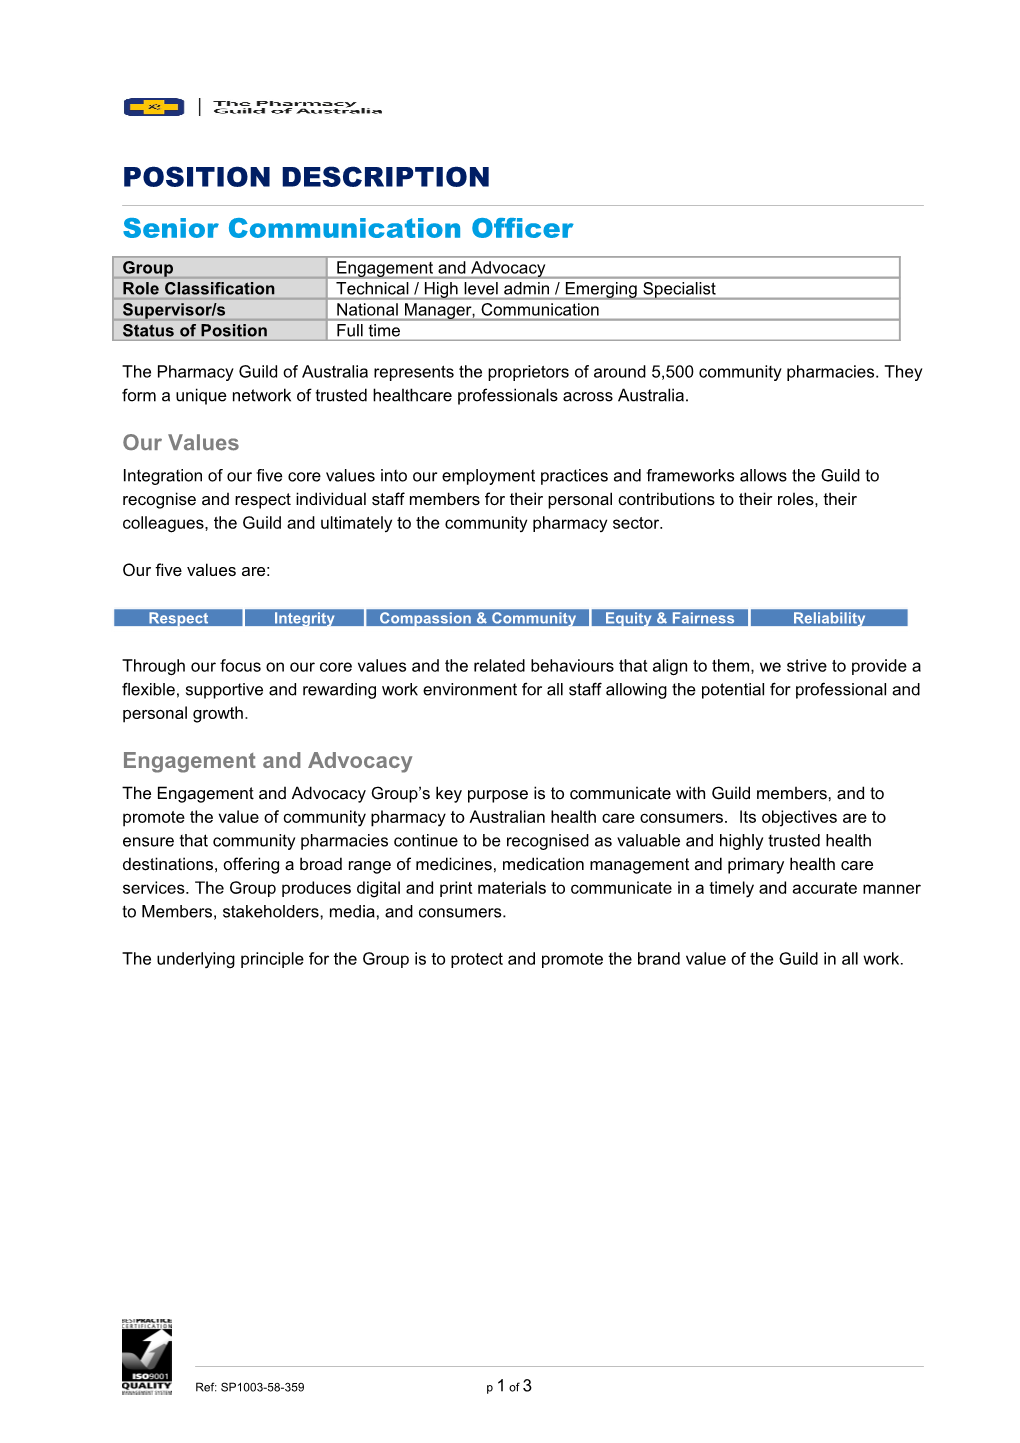 EA Senior Communication Officer - Contract Role